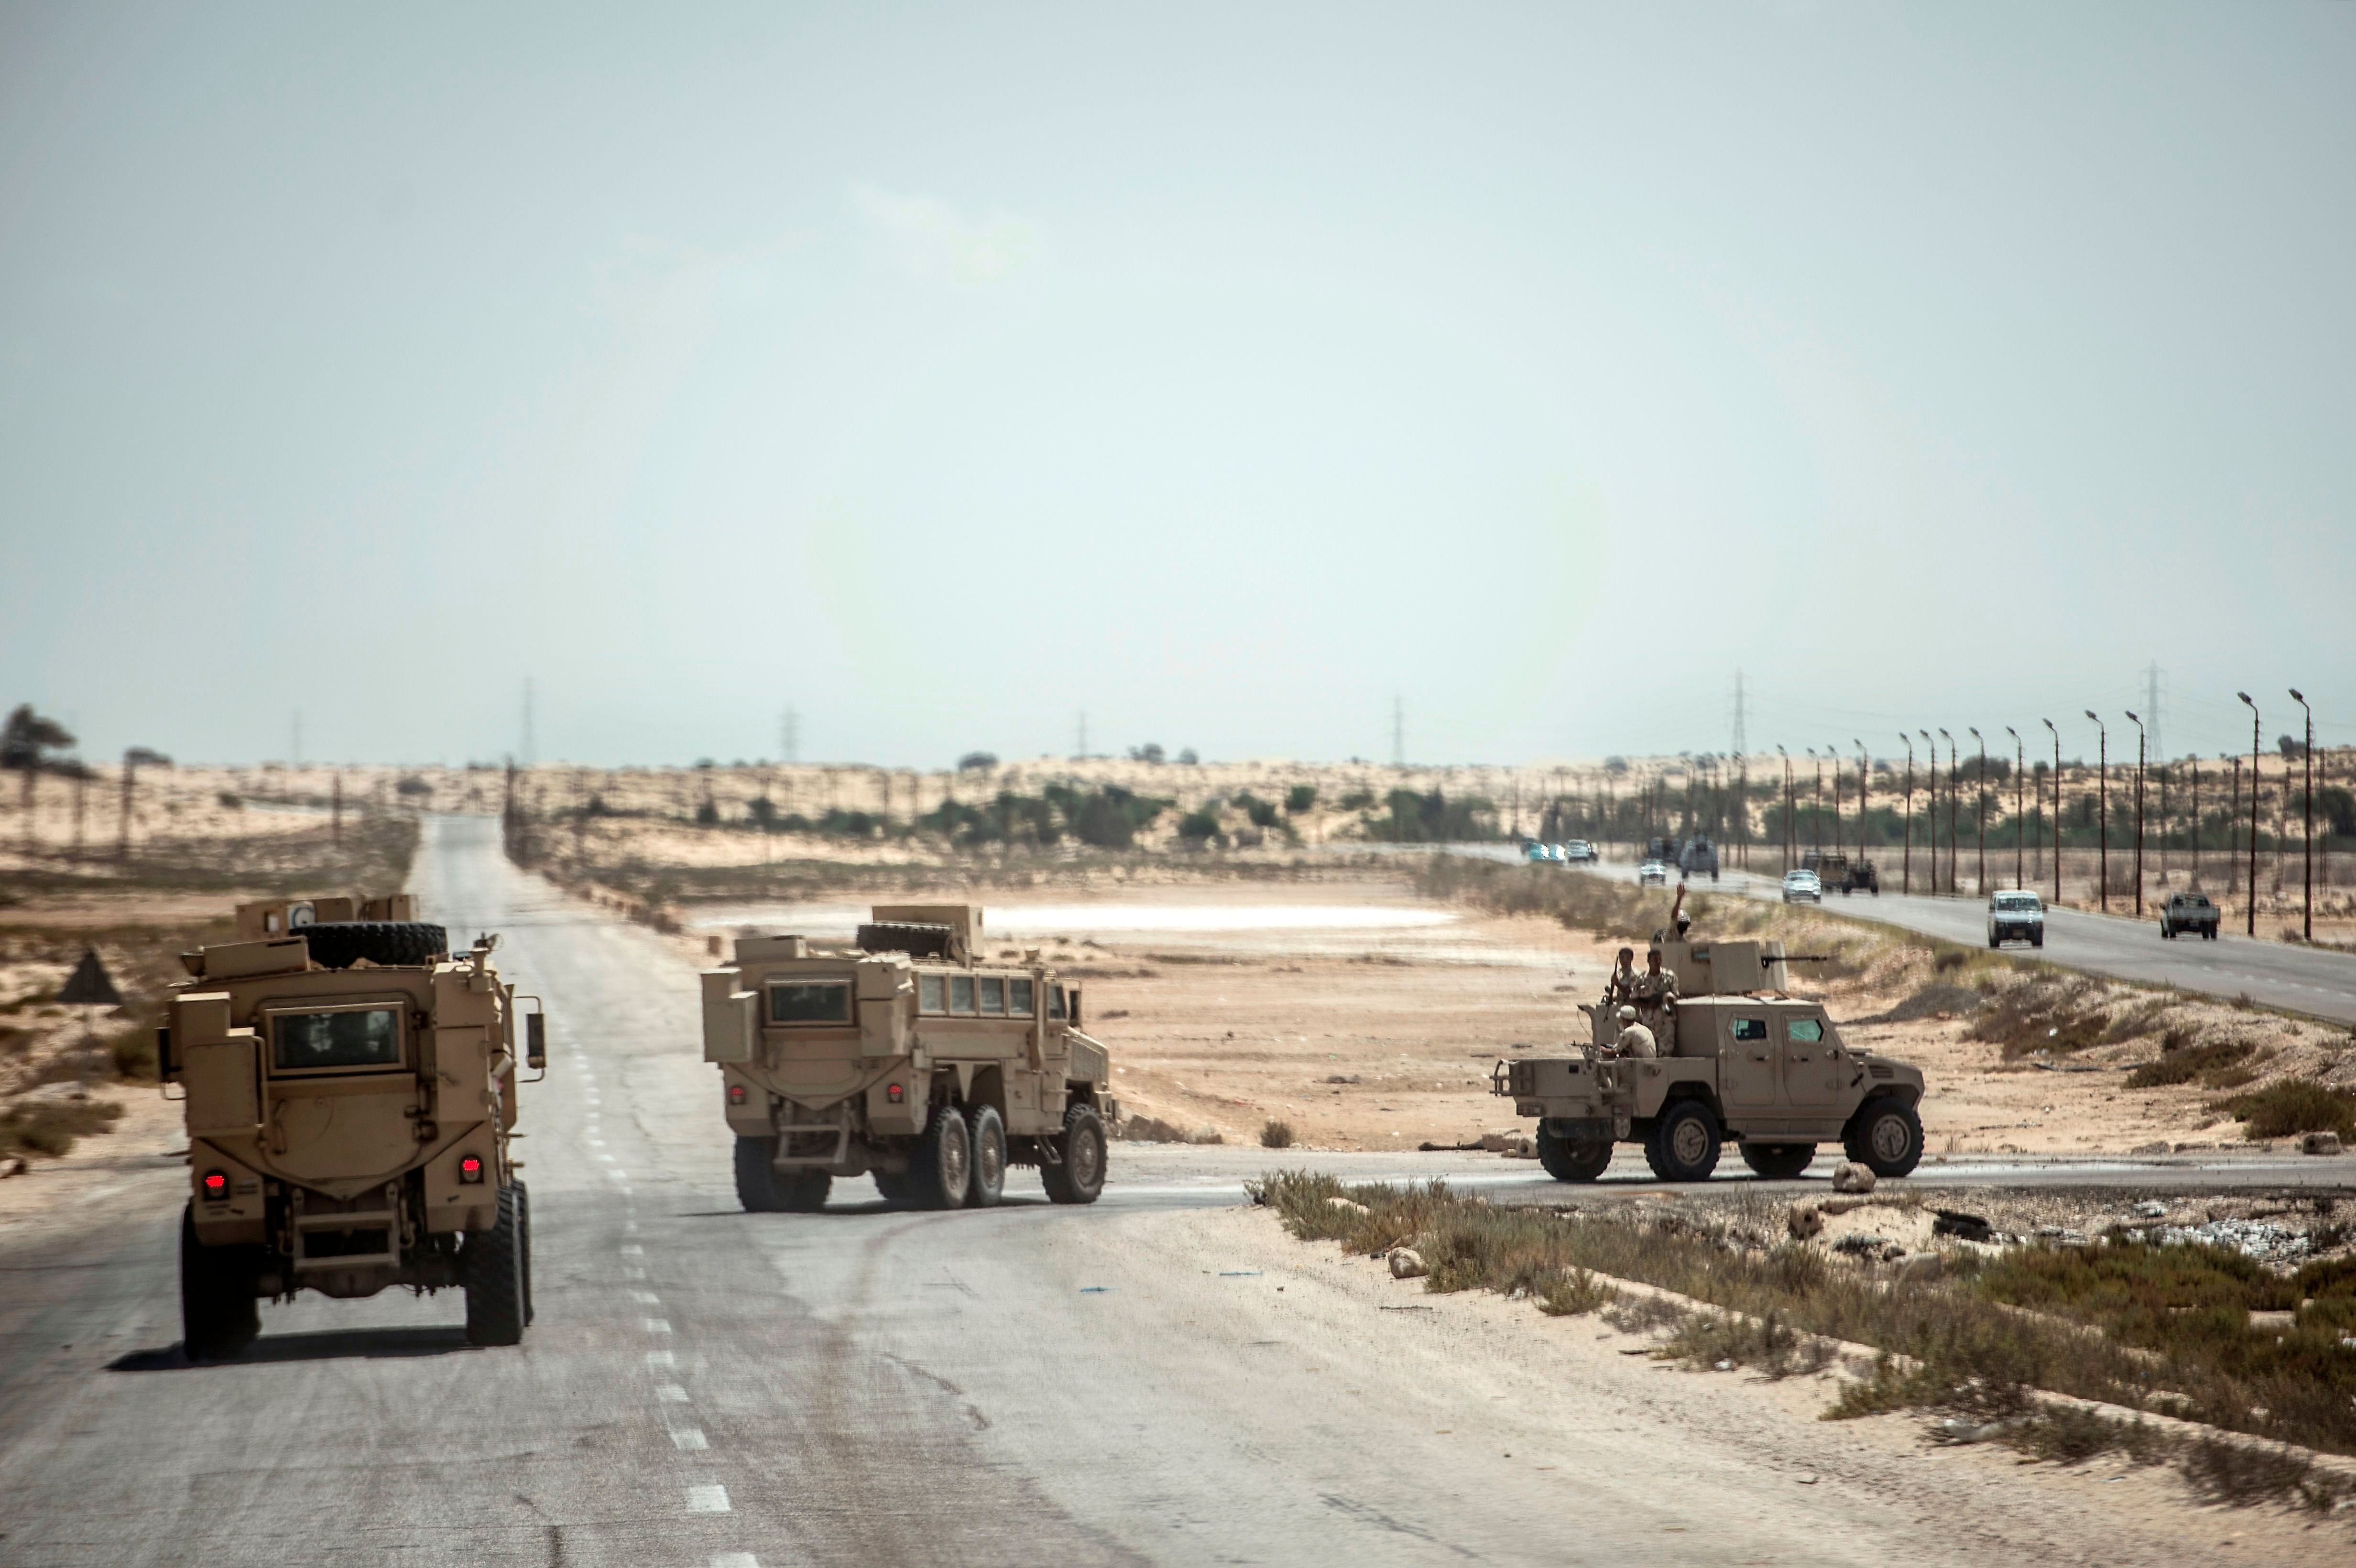 Egypt has been battling militants in North Sinai for years